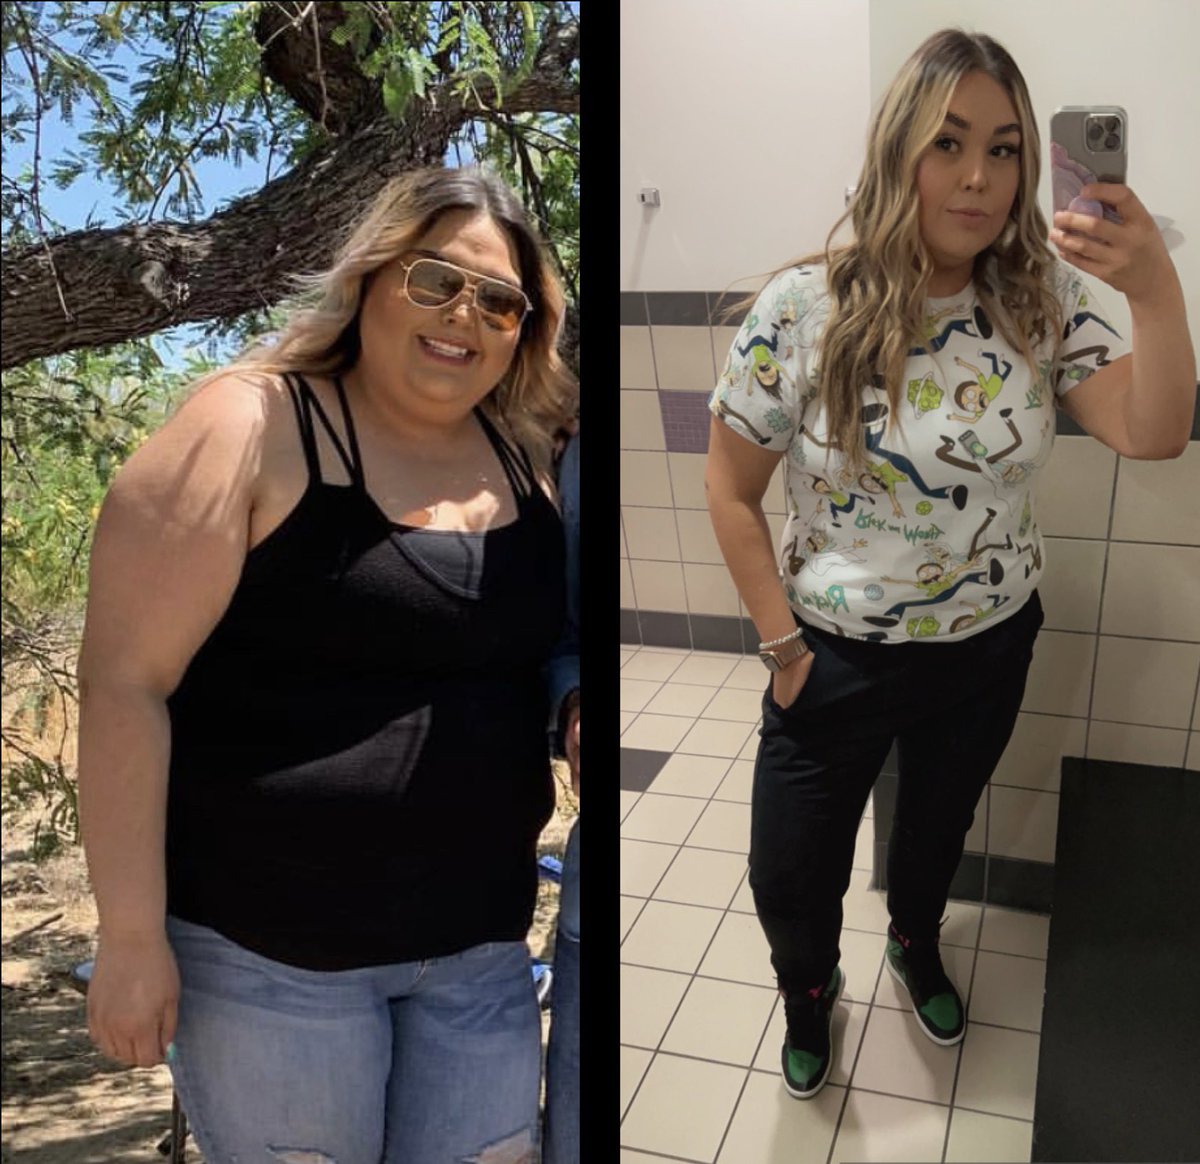 It's been almost a year in July since I started my weight loss journey. All naturally with diet and hard work.
Im down 103 lbs and I'm not done.

My goal isn't to be skinny. I just wanted to feel better and keep up with my toddler oh and #hotmomsummer 
#weightlosstransformation